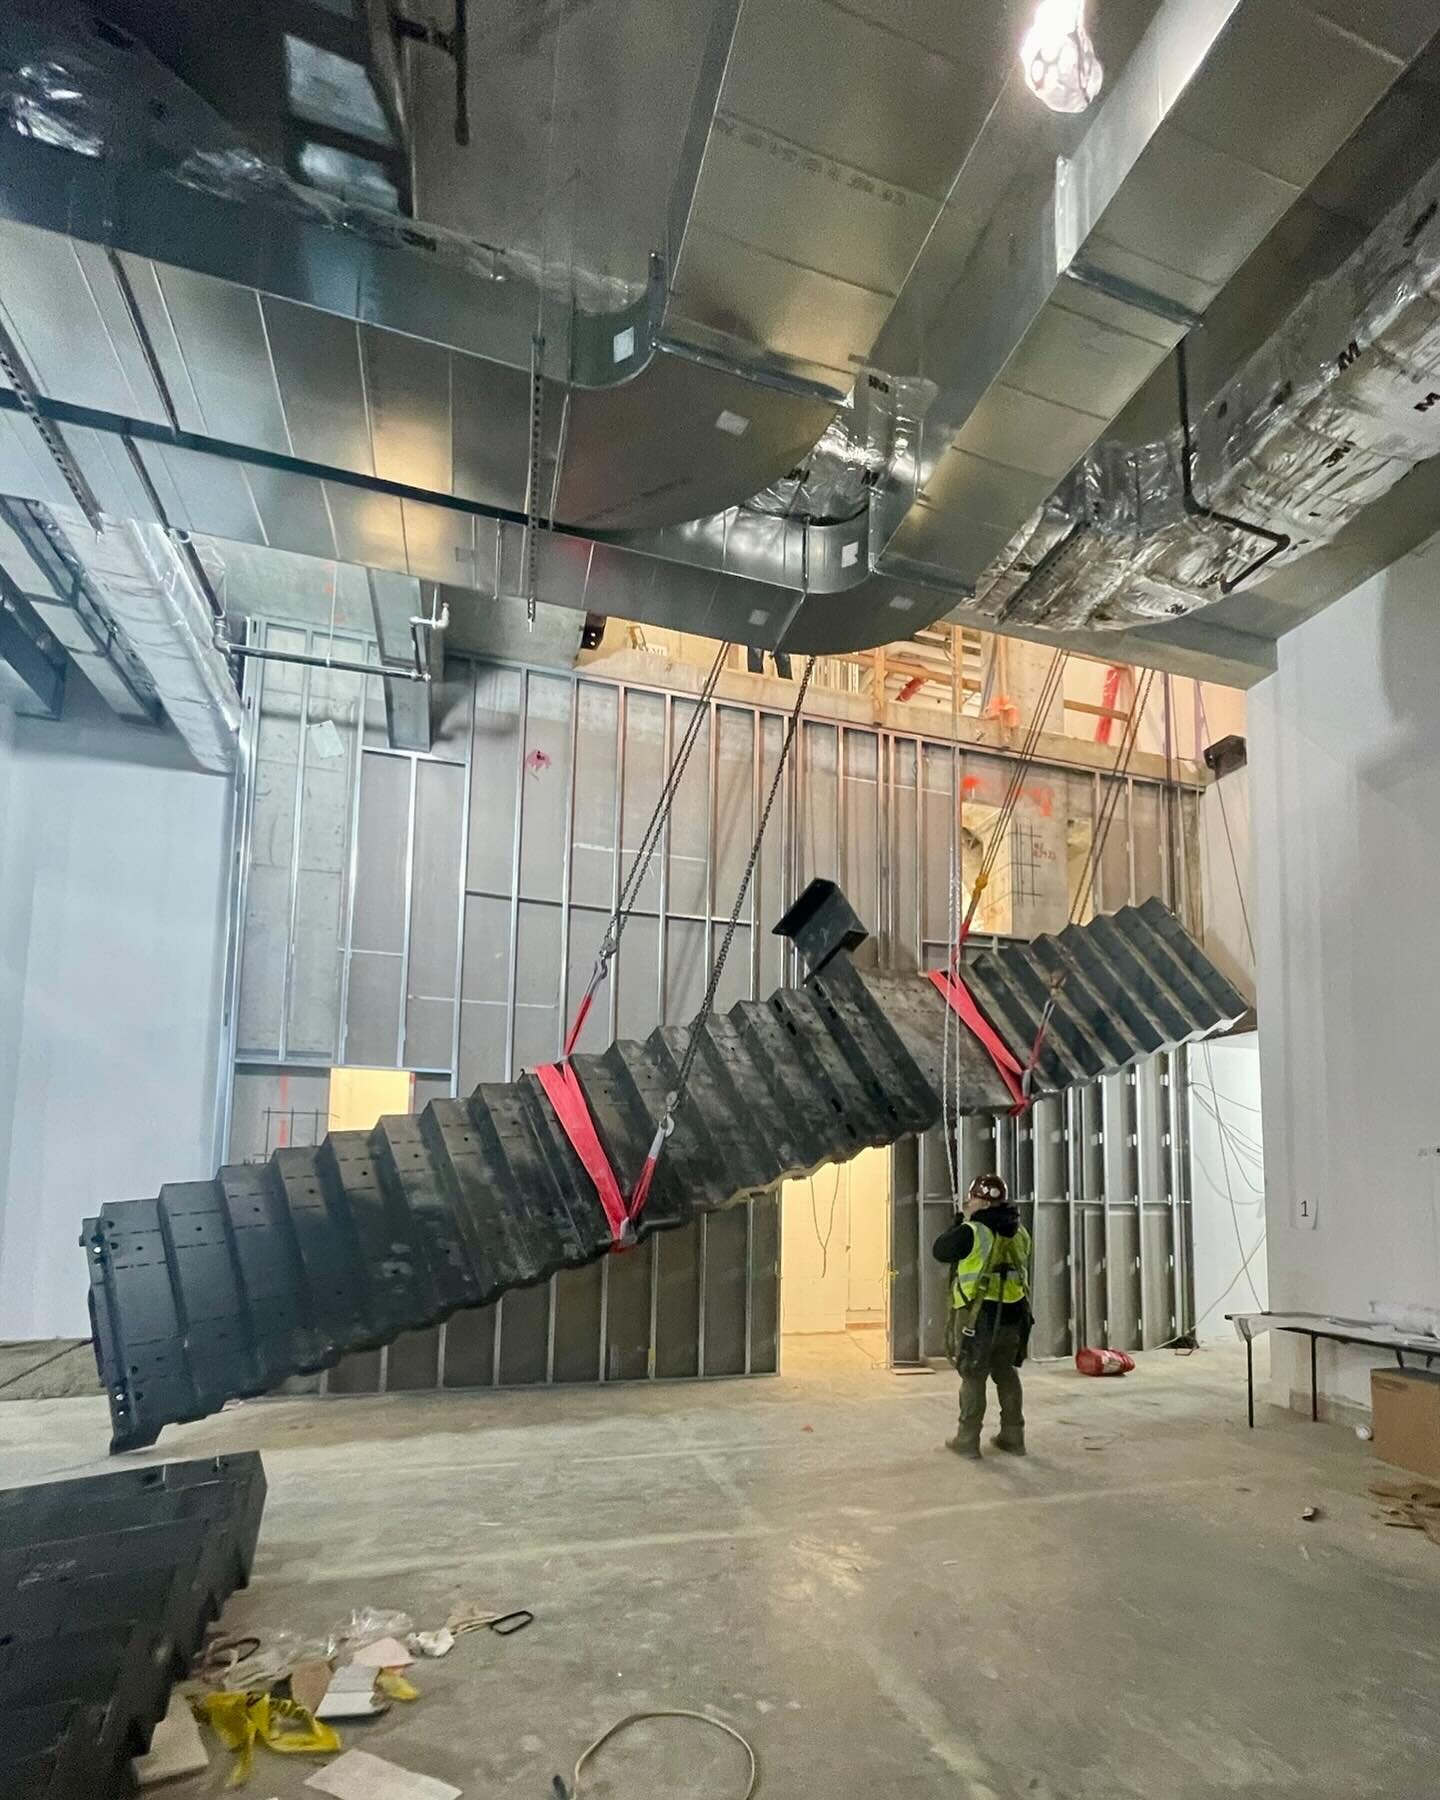 One monumental stair coming right up!
A sneak peek at one of our intriguing works in progress.

#atmospheredesigngroup #retailarchitecture  #retaildesign #luxuryretail #sneakpeek